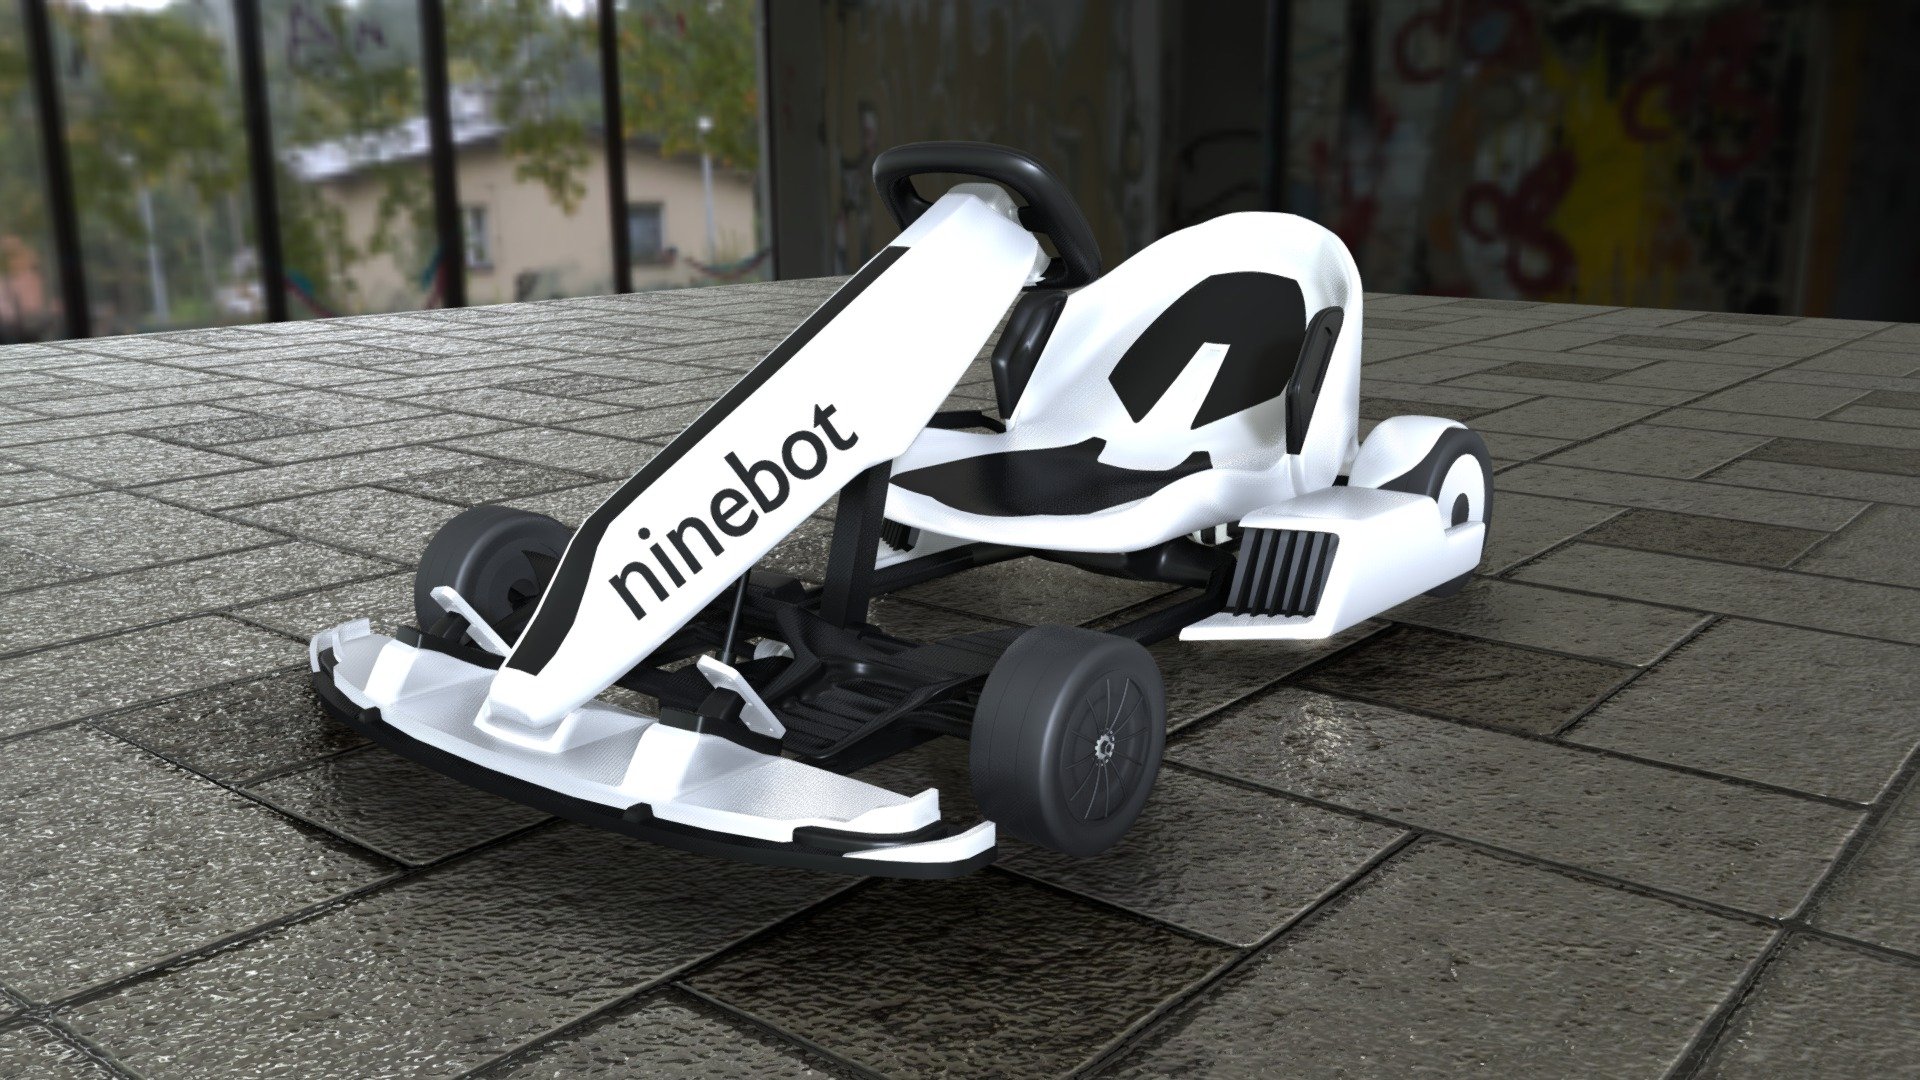 First time ever made as 3D model of ninebot go-kart, realistic design with great quality, refine geometry with smooth shading. Separated and animated wheels, pedals, and steering wheel, can be used for visualization and gaming purposes.

as per request, it can be made for 3D printing without any charges.

several formats are included which are compatible and best for gaming engines such as Unity, Unreal engine 4 3d model